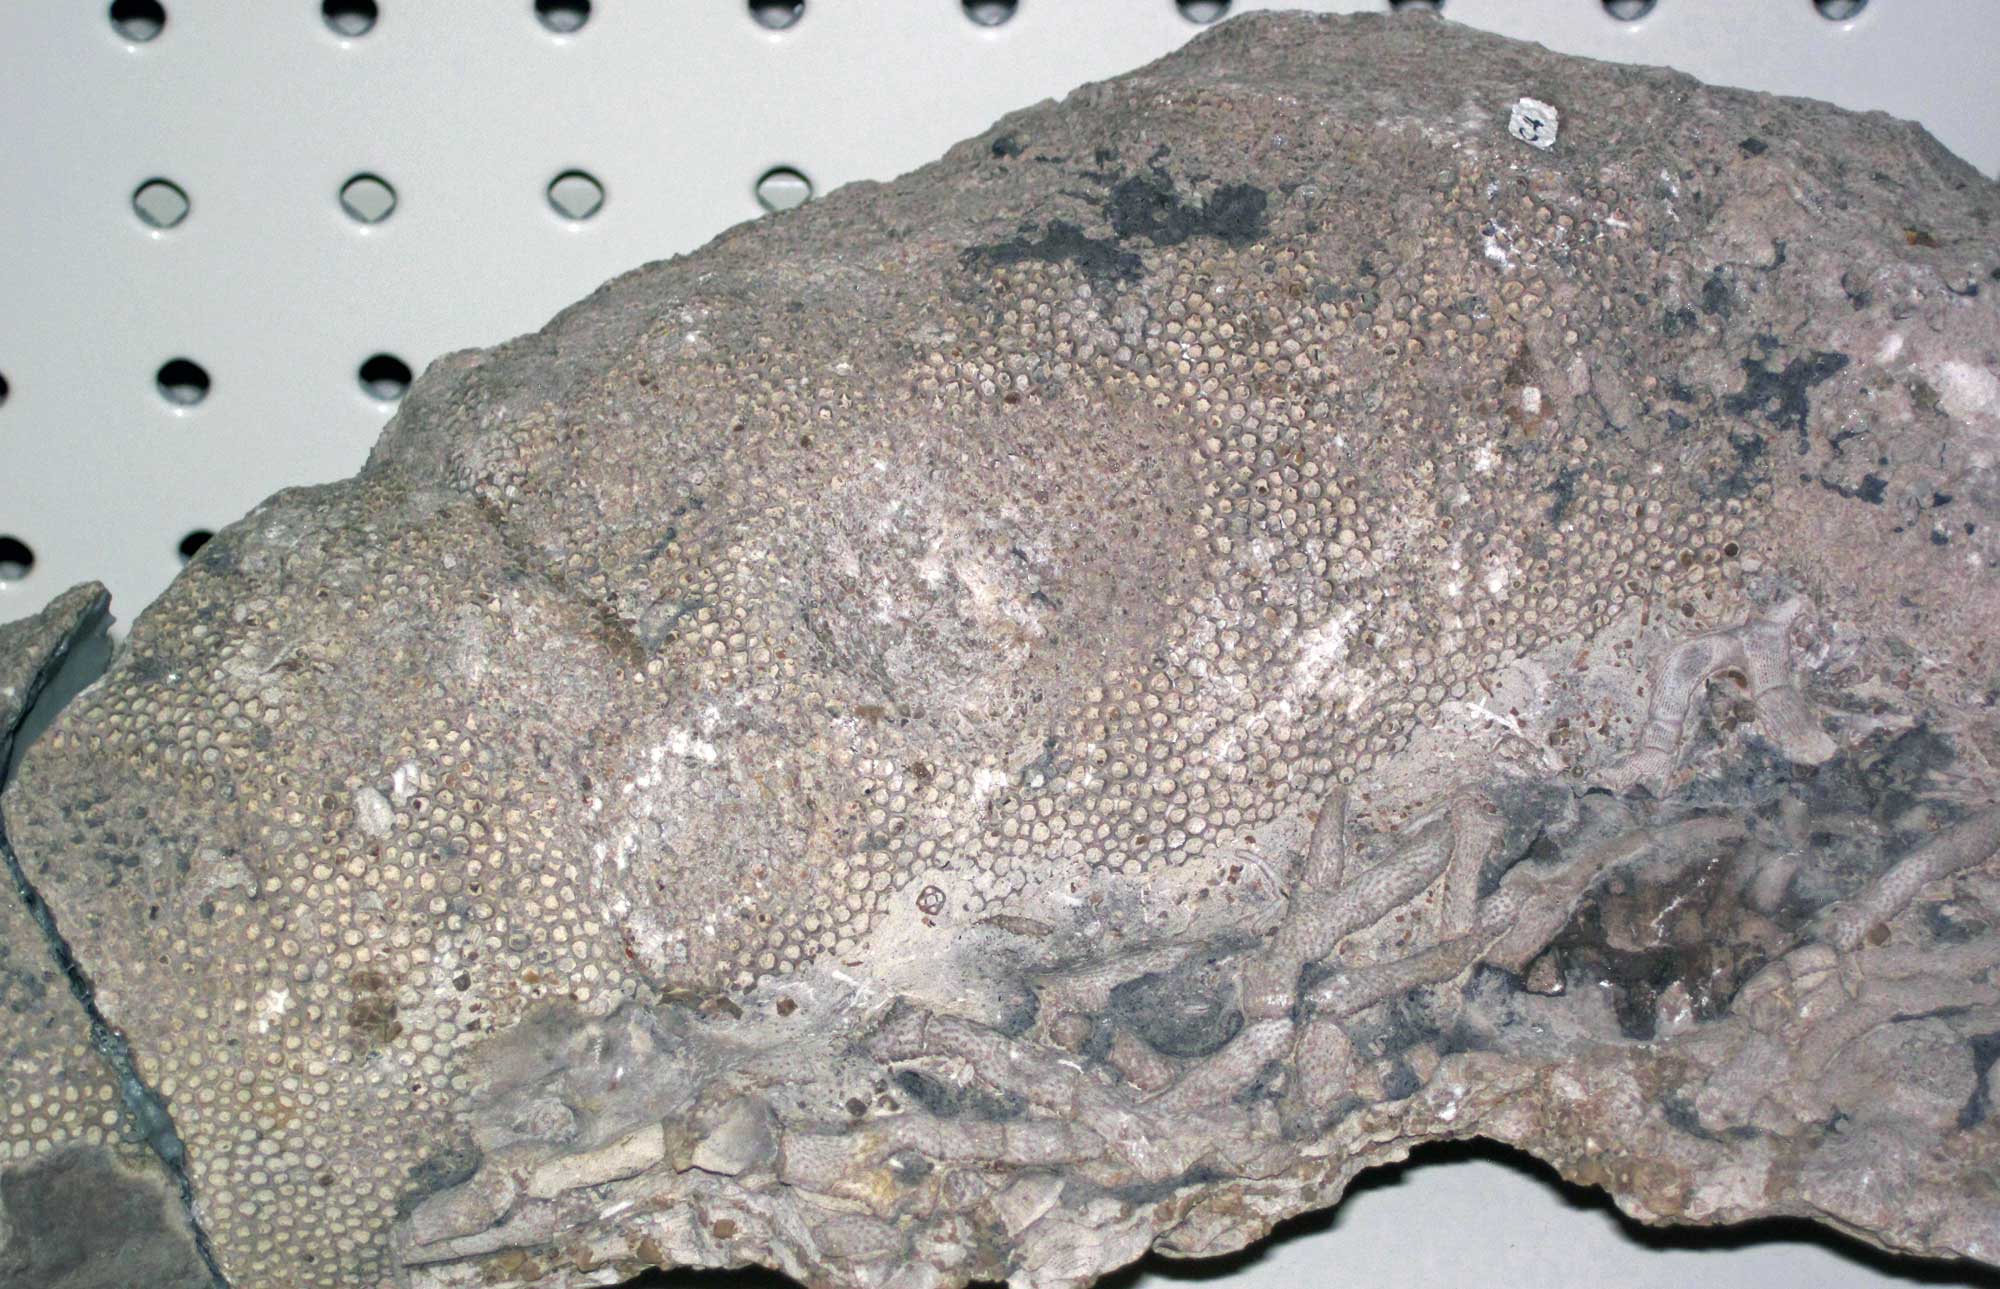 Photograph of a tabulate coral from the Devonian of Indiana. The photo shows a light gray rock with a pebble-like pattern on its upper surface and branching structures on its side.